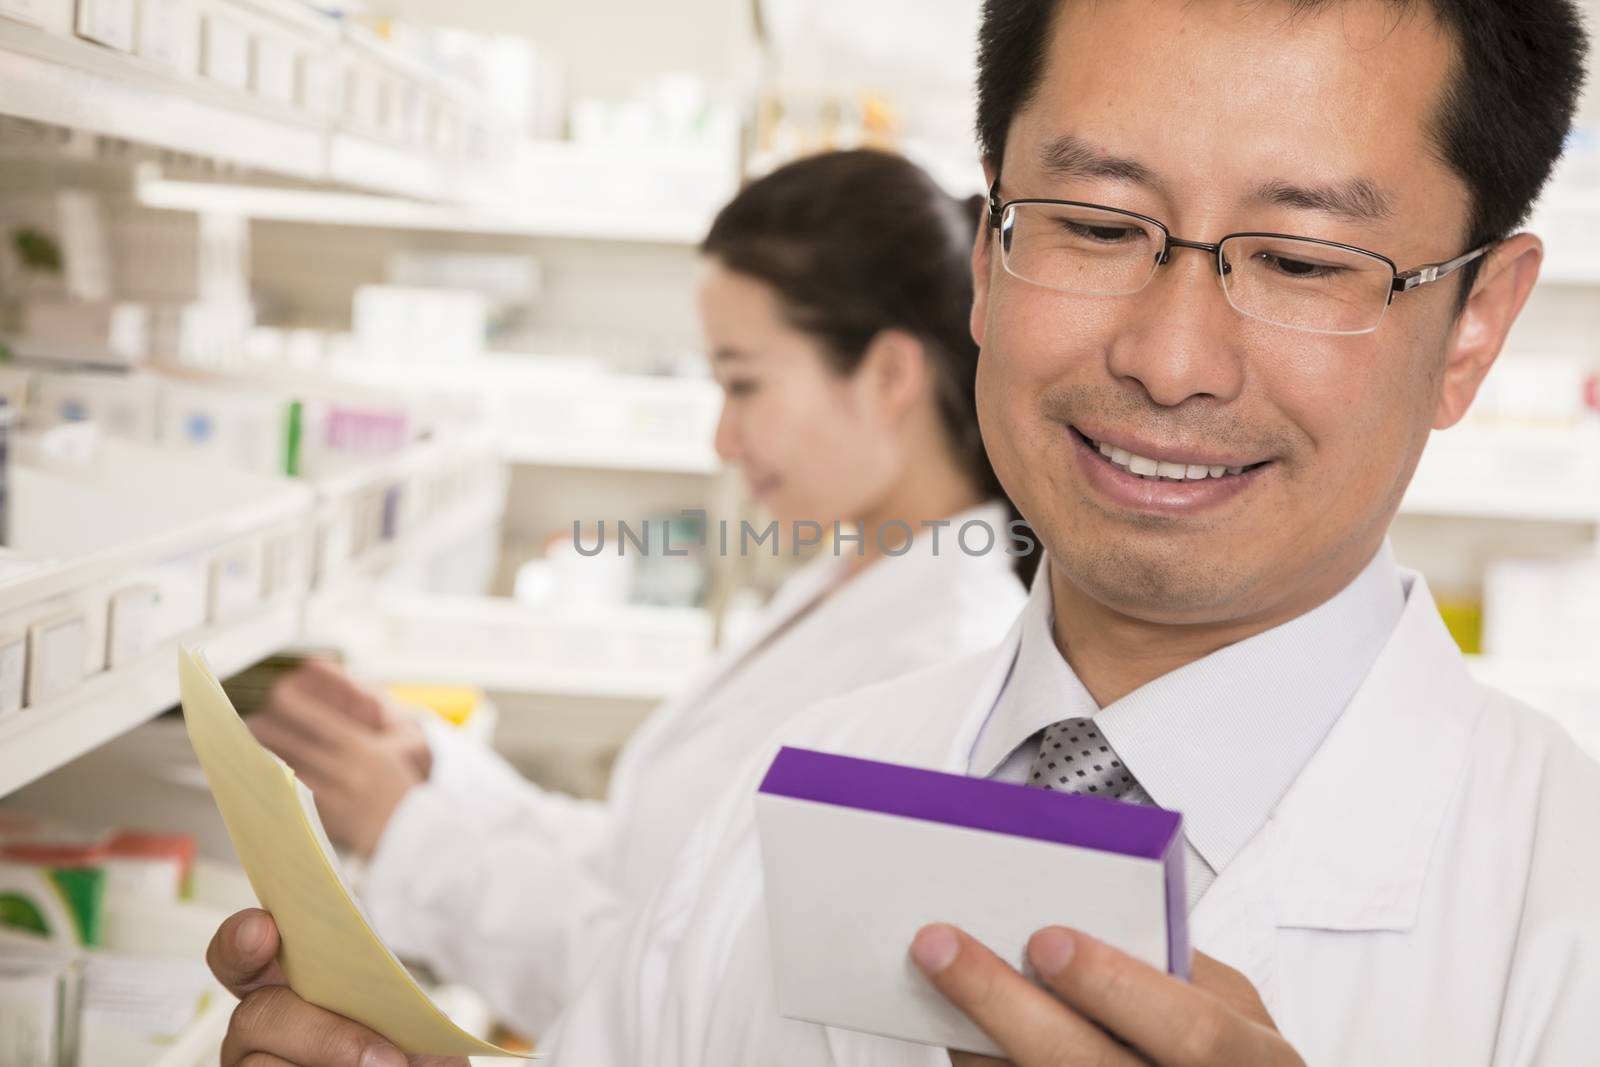 Pharmacist looking down and examining prescription medication in a pharmacy